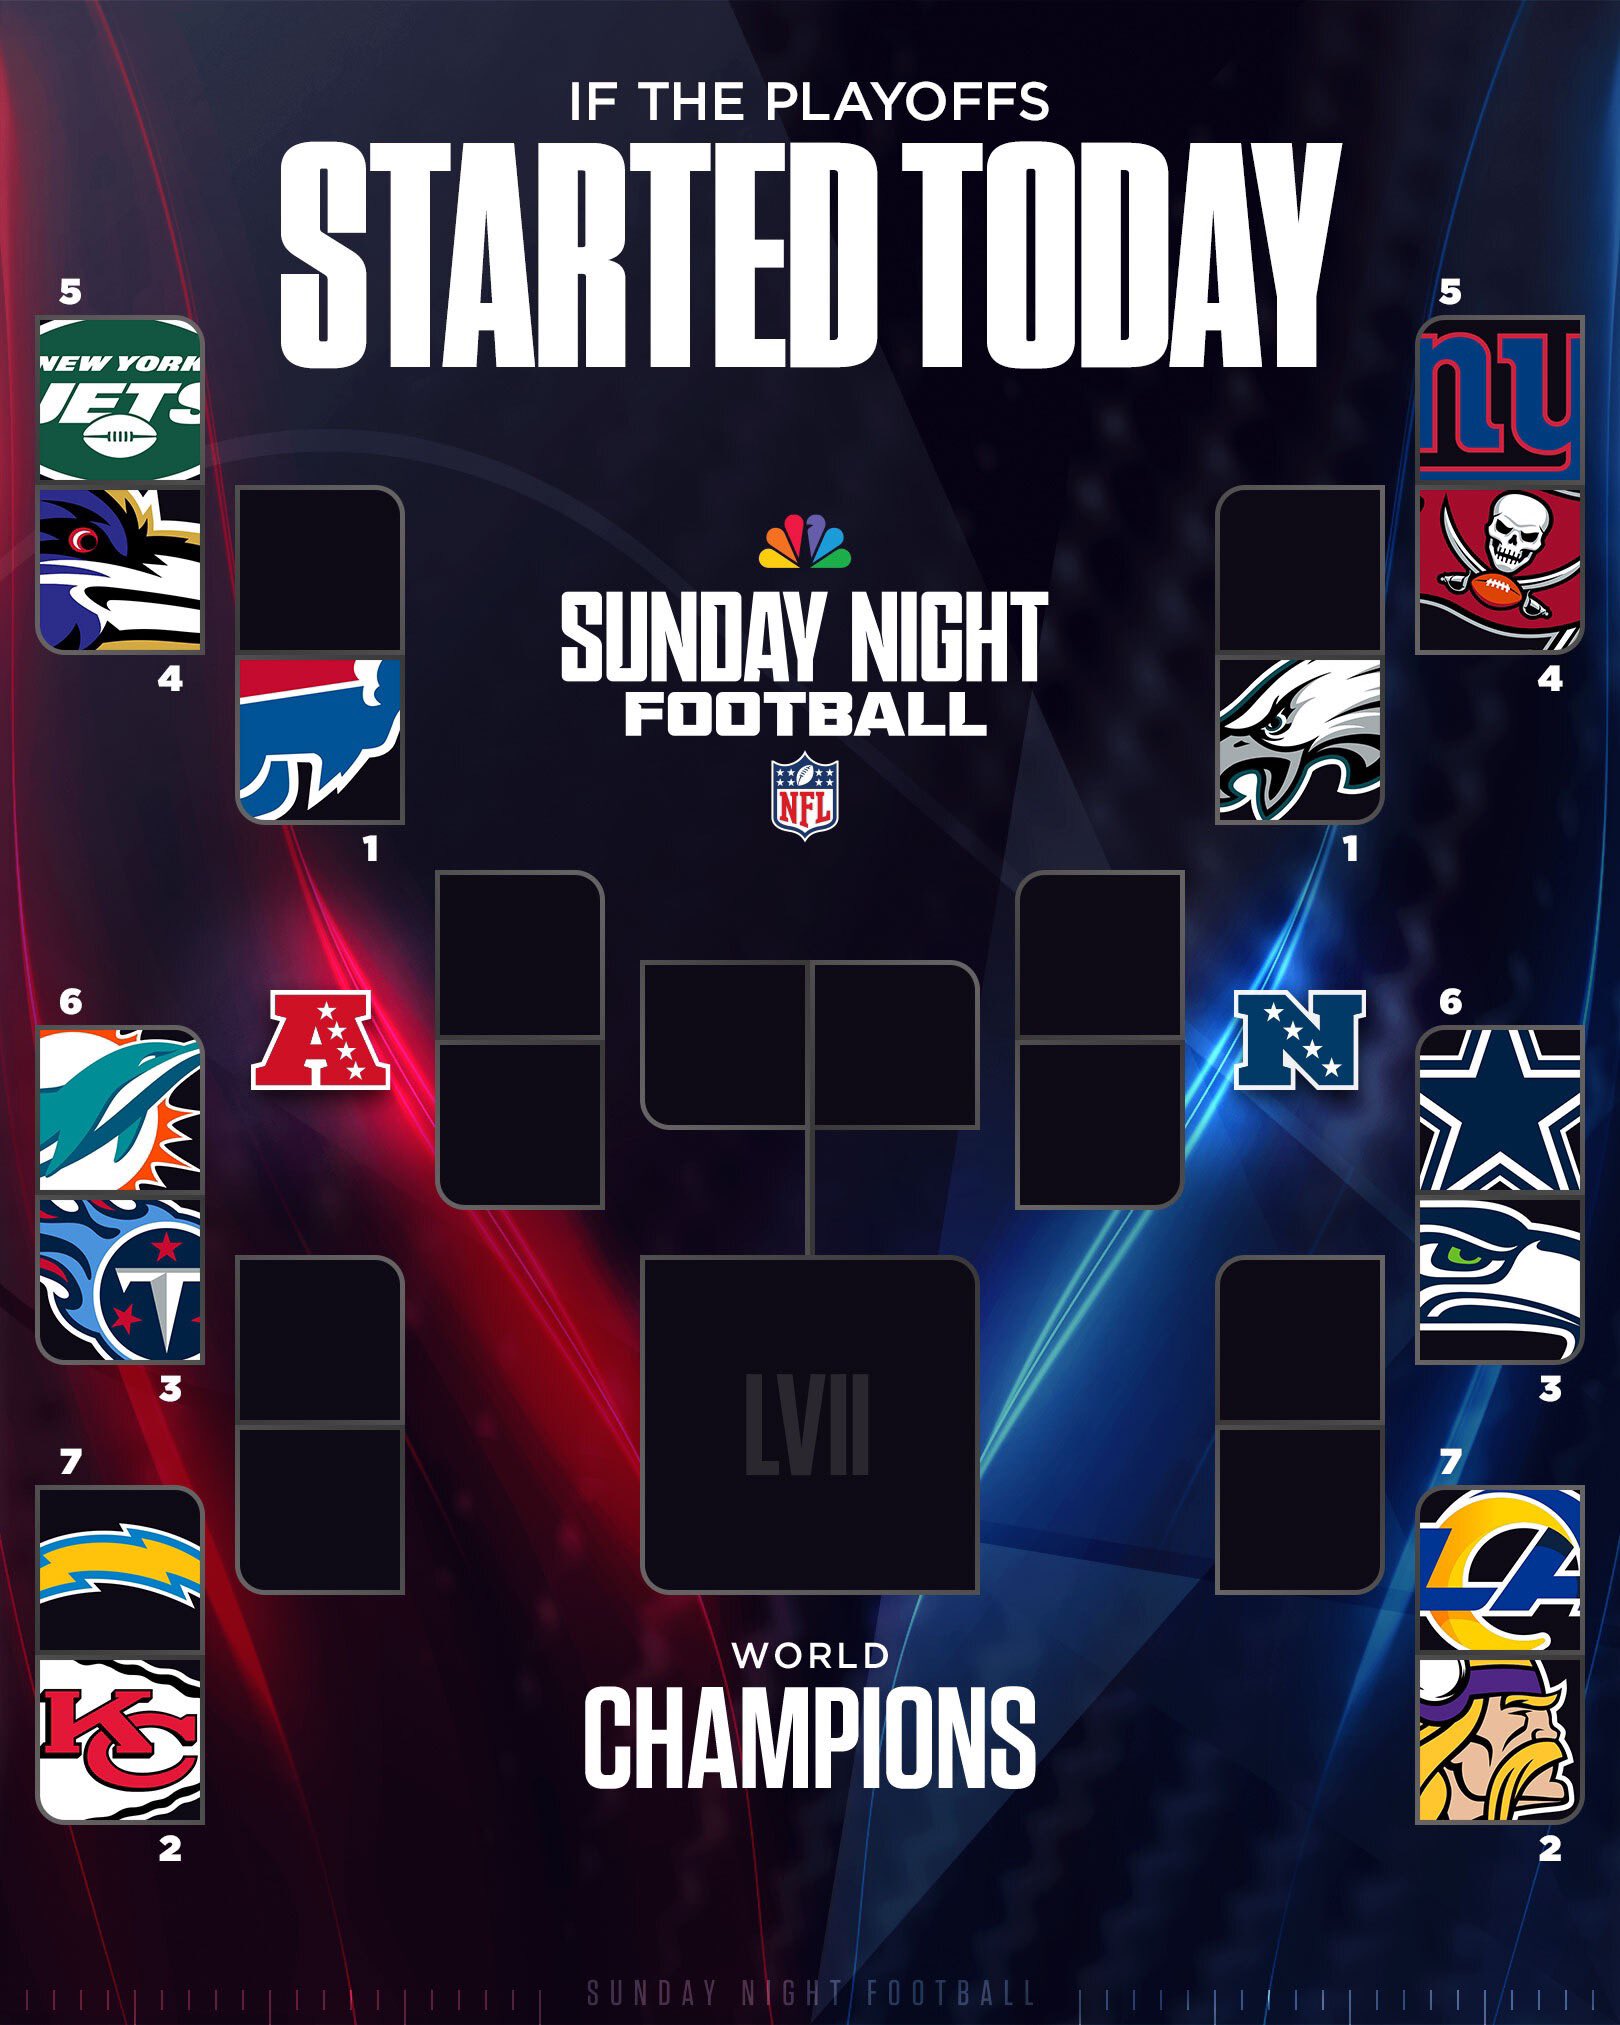 Sunday Night Football on NBC on X: 'If the playoffs started today